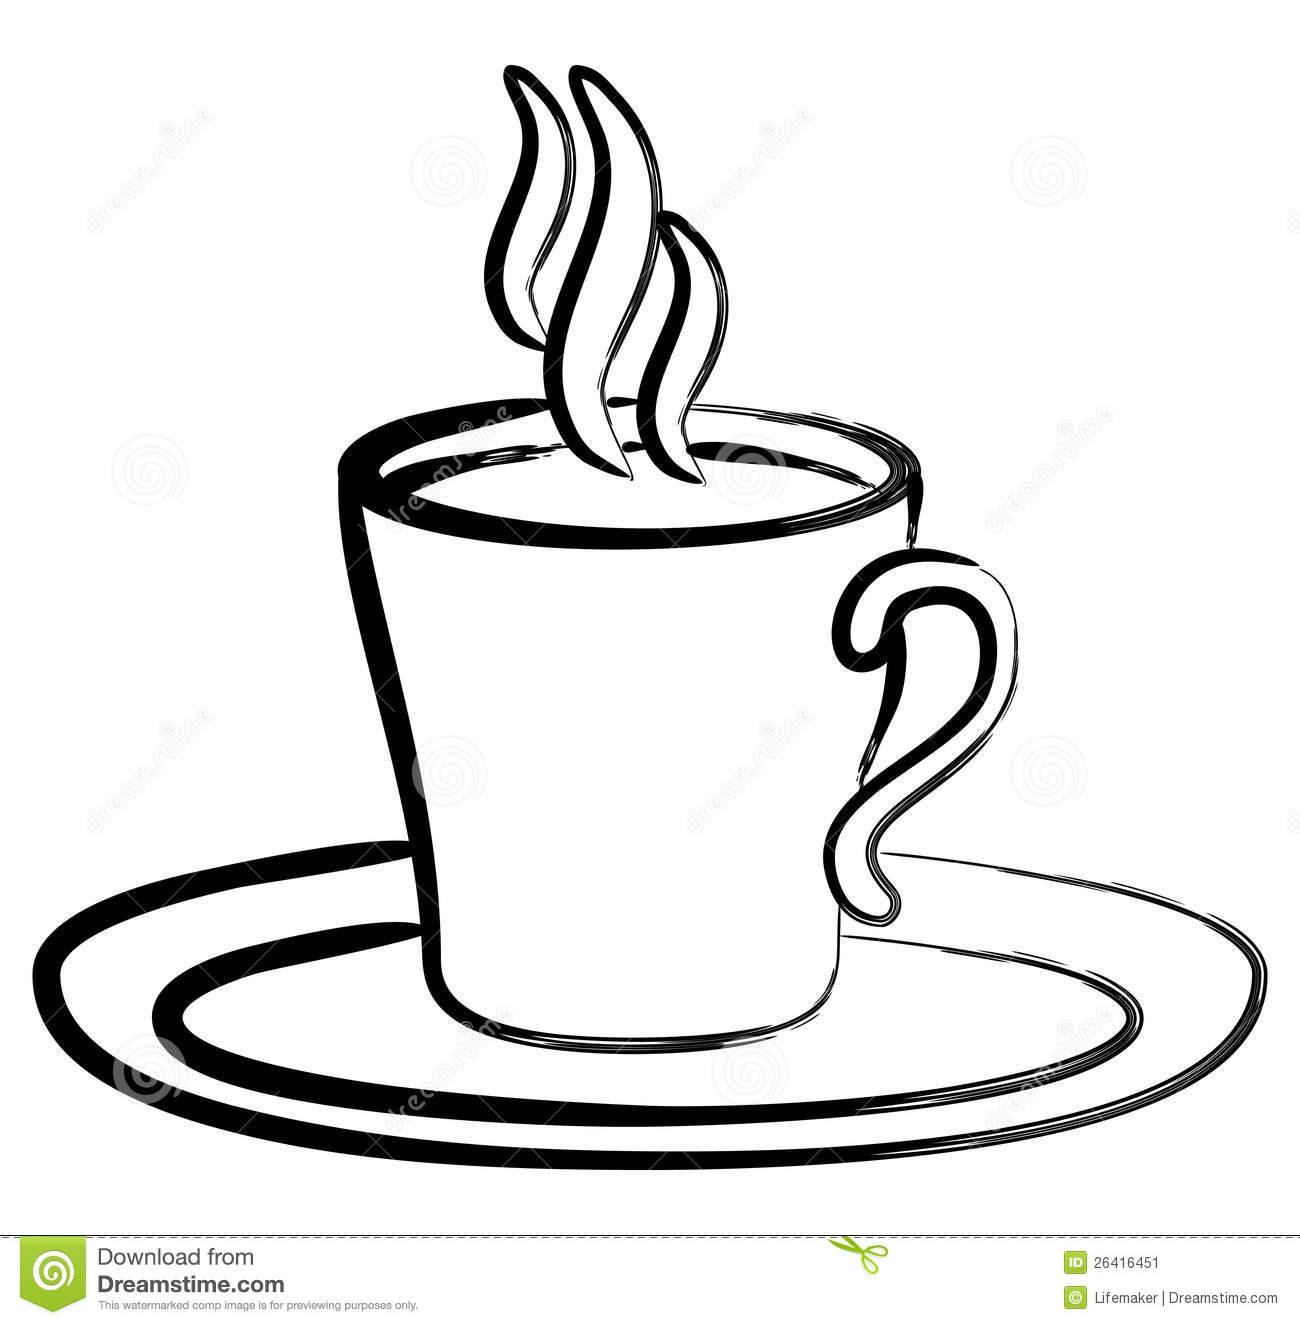 Art Black White Coffee In Cup Stock Image   Image  26416451